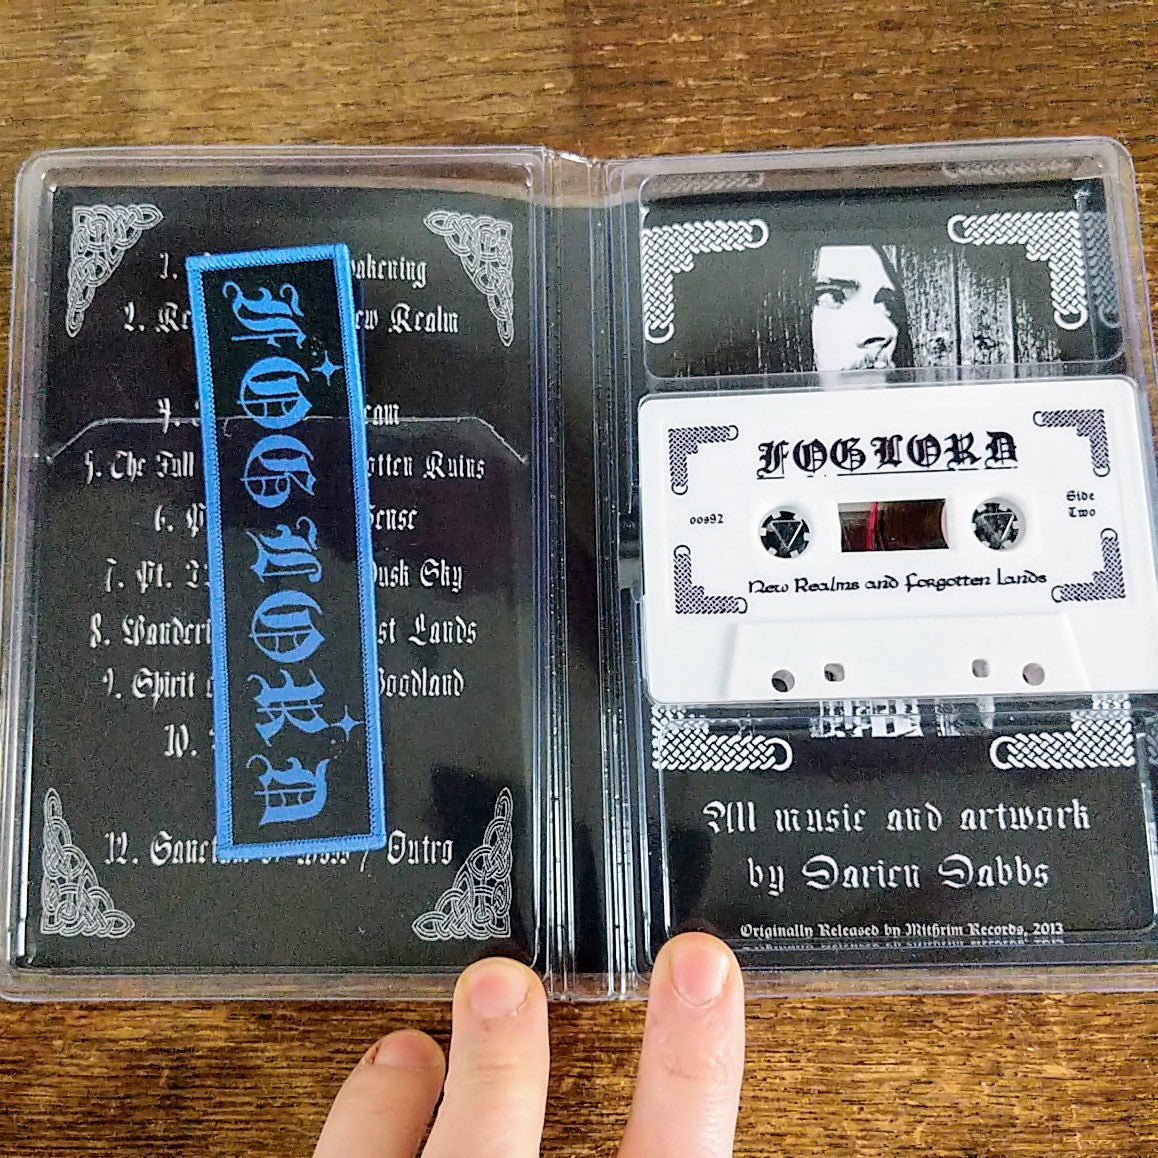 [SOLD OUT] FOGLORD 'New Realms...' (NEDS MMXX Edition) Cassette Tape